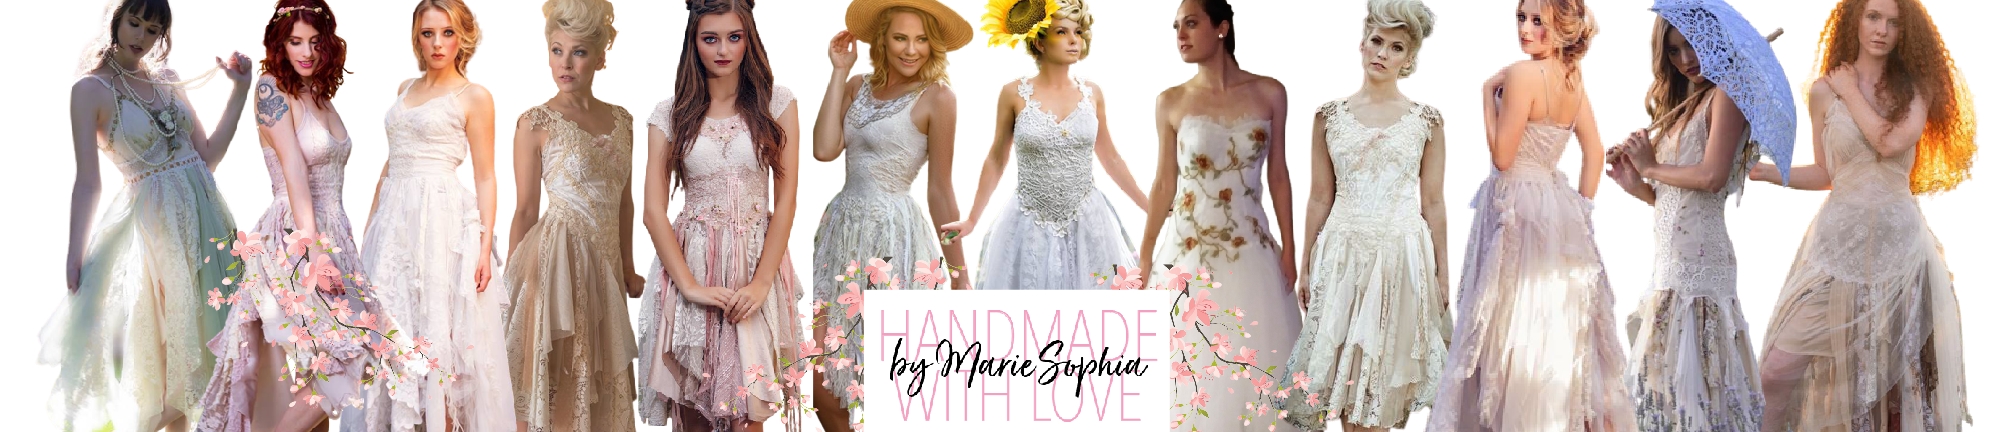 A sample of the kind of dresses made by Marie Sophia